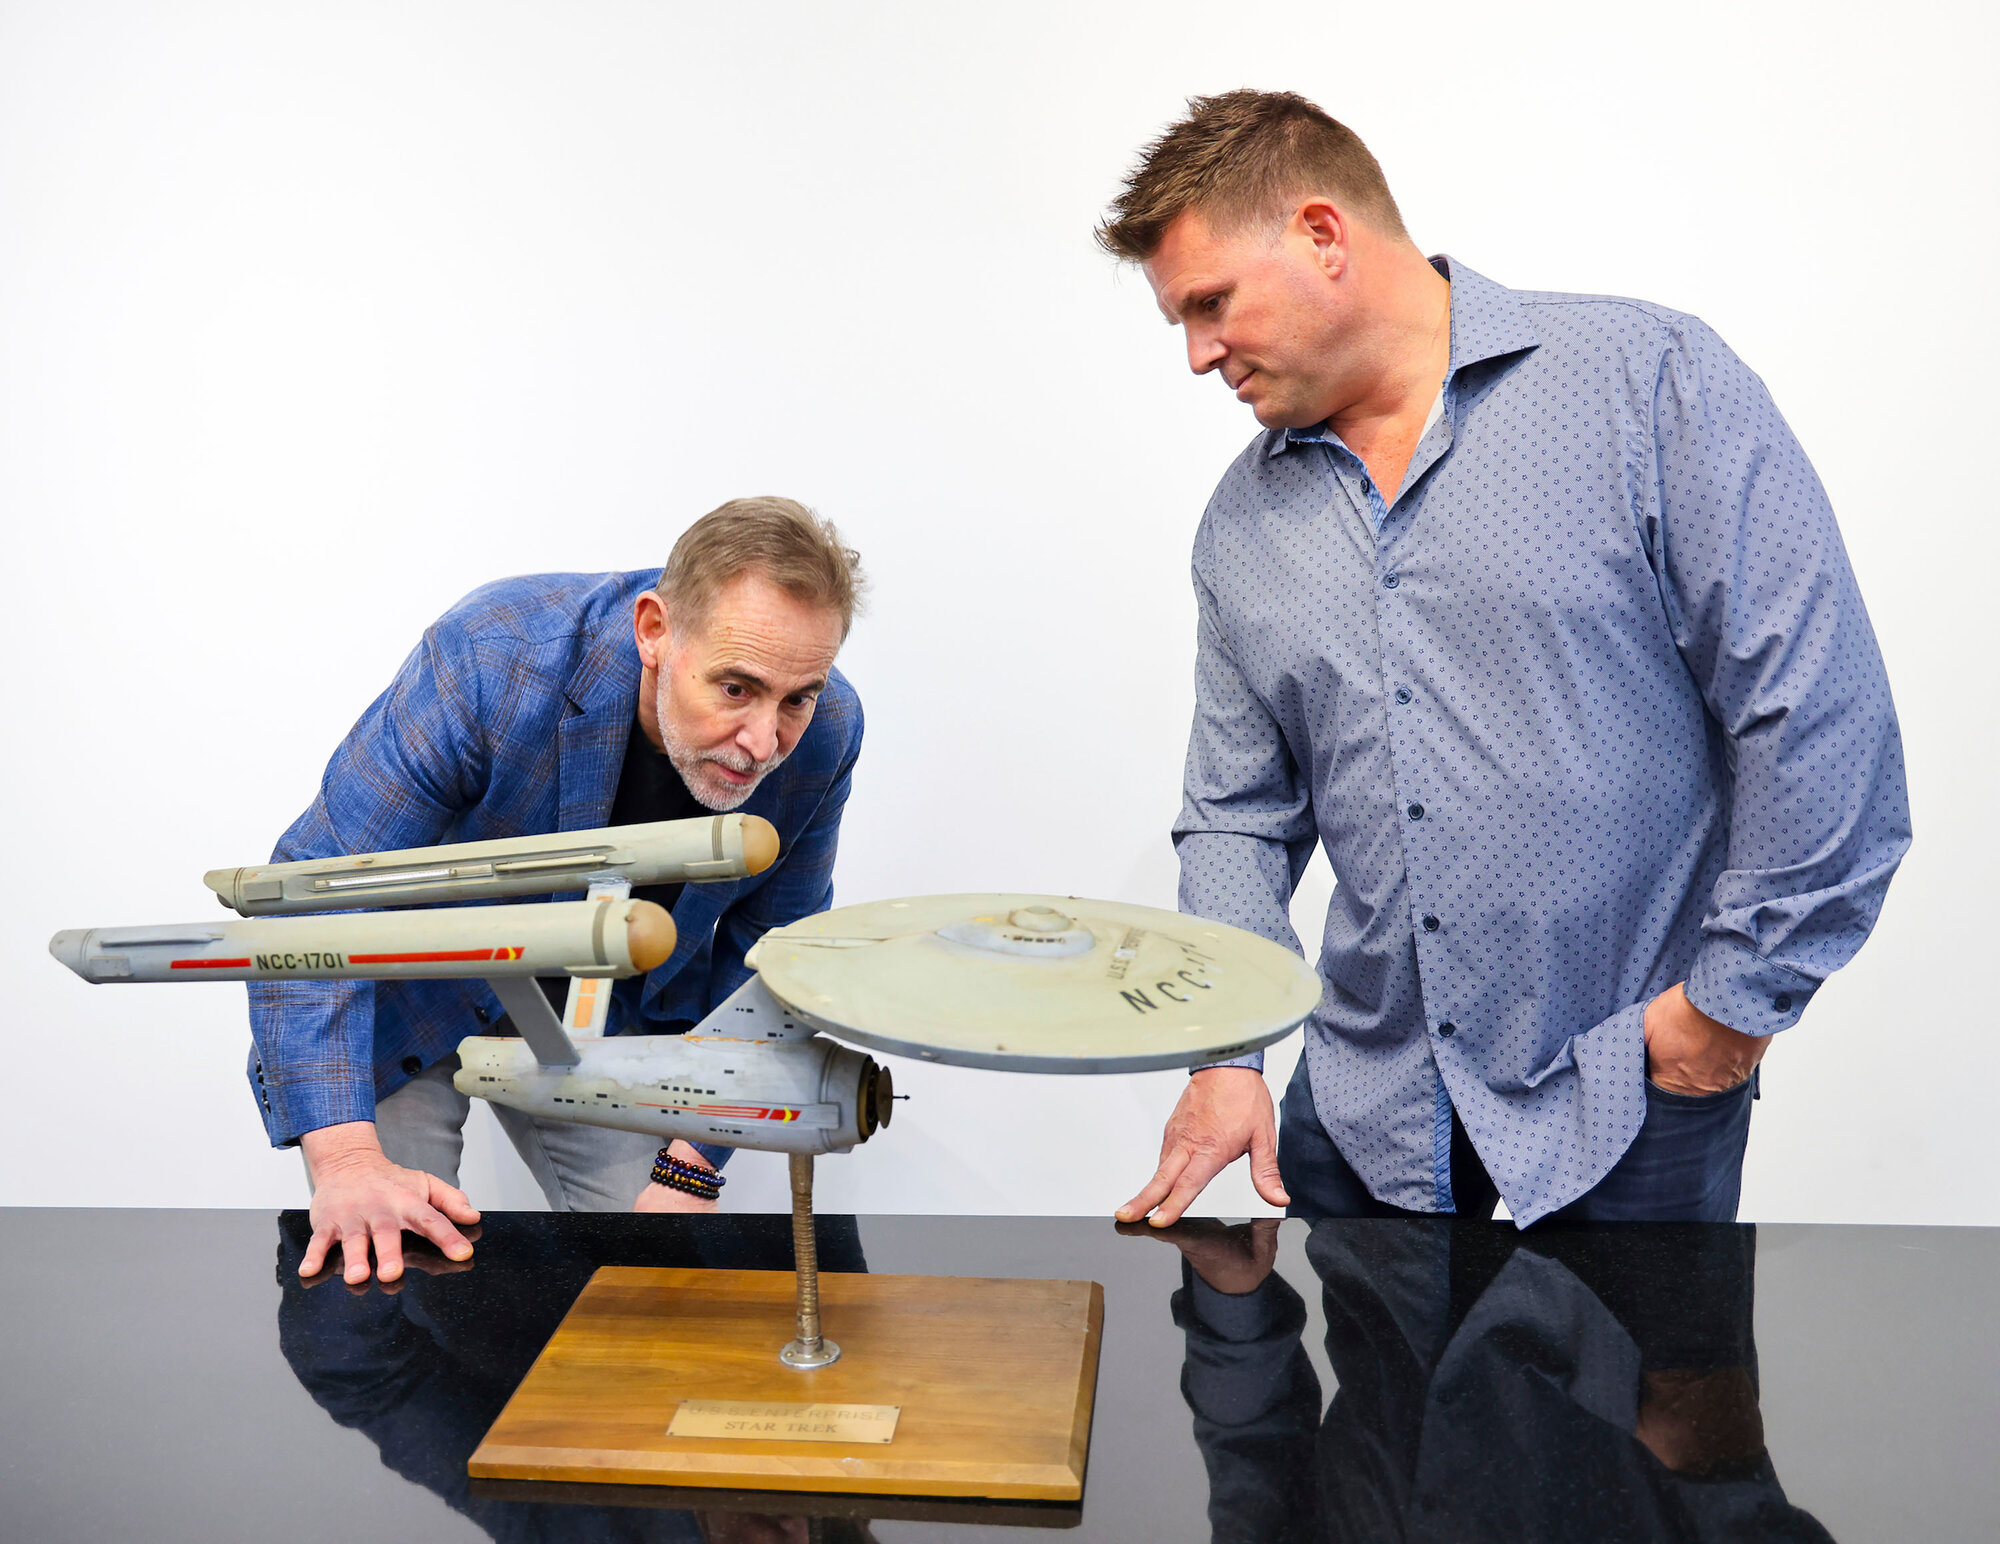 Joe Maddalena, executive vice president of Heritage Auctions, left, and Eugene "Rod" Roddenberry, the son of "Star Trek" creator Gene Roddenberry, view the recently recovered first model of the USS Enterprise at Heritage Auctions in Los Angeles on April 13. The model - used in the original "Star Trek" TV series - has been returned to Gene, decades after it went missing in the 1970s.